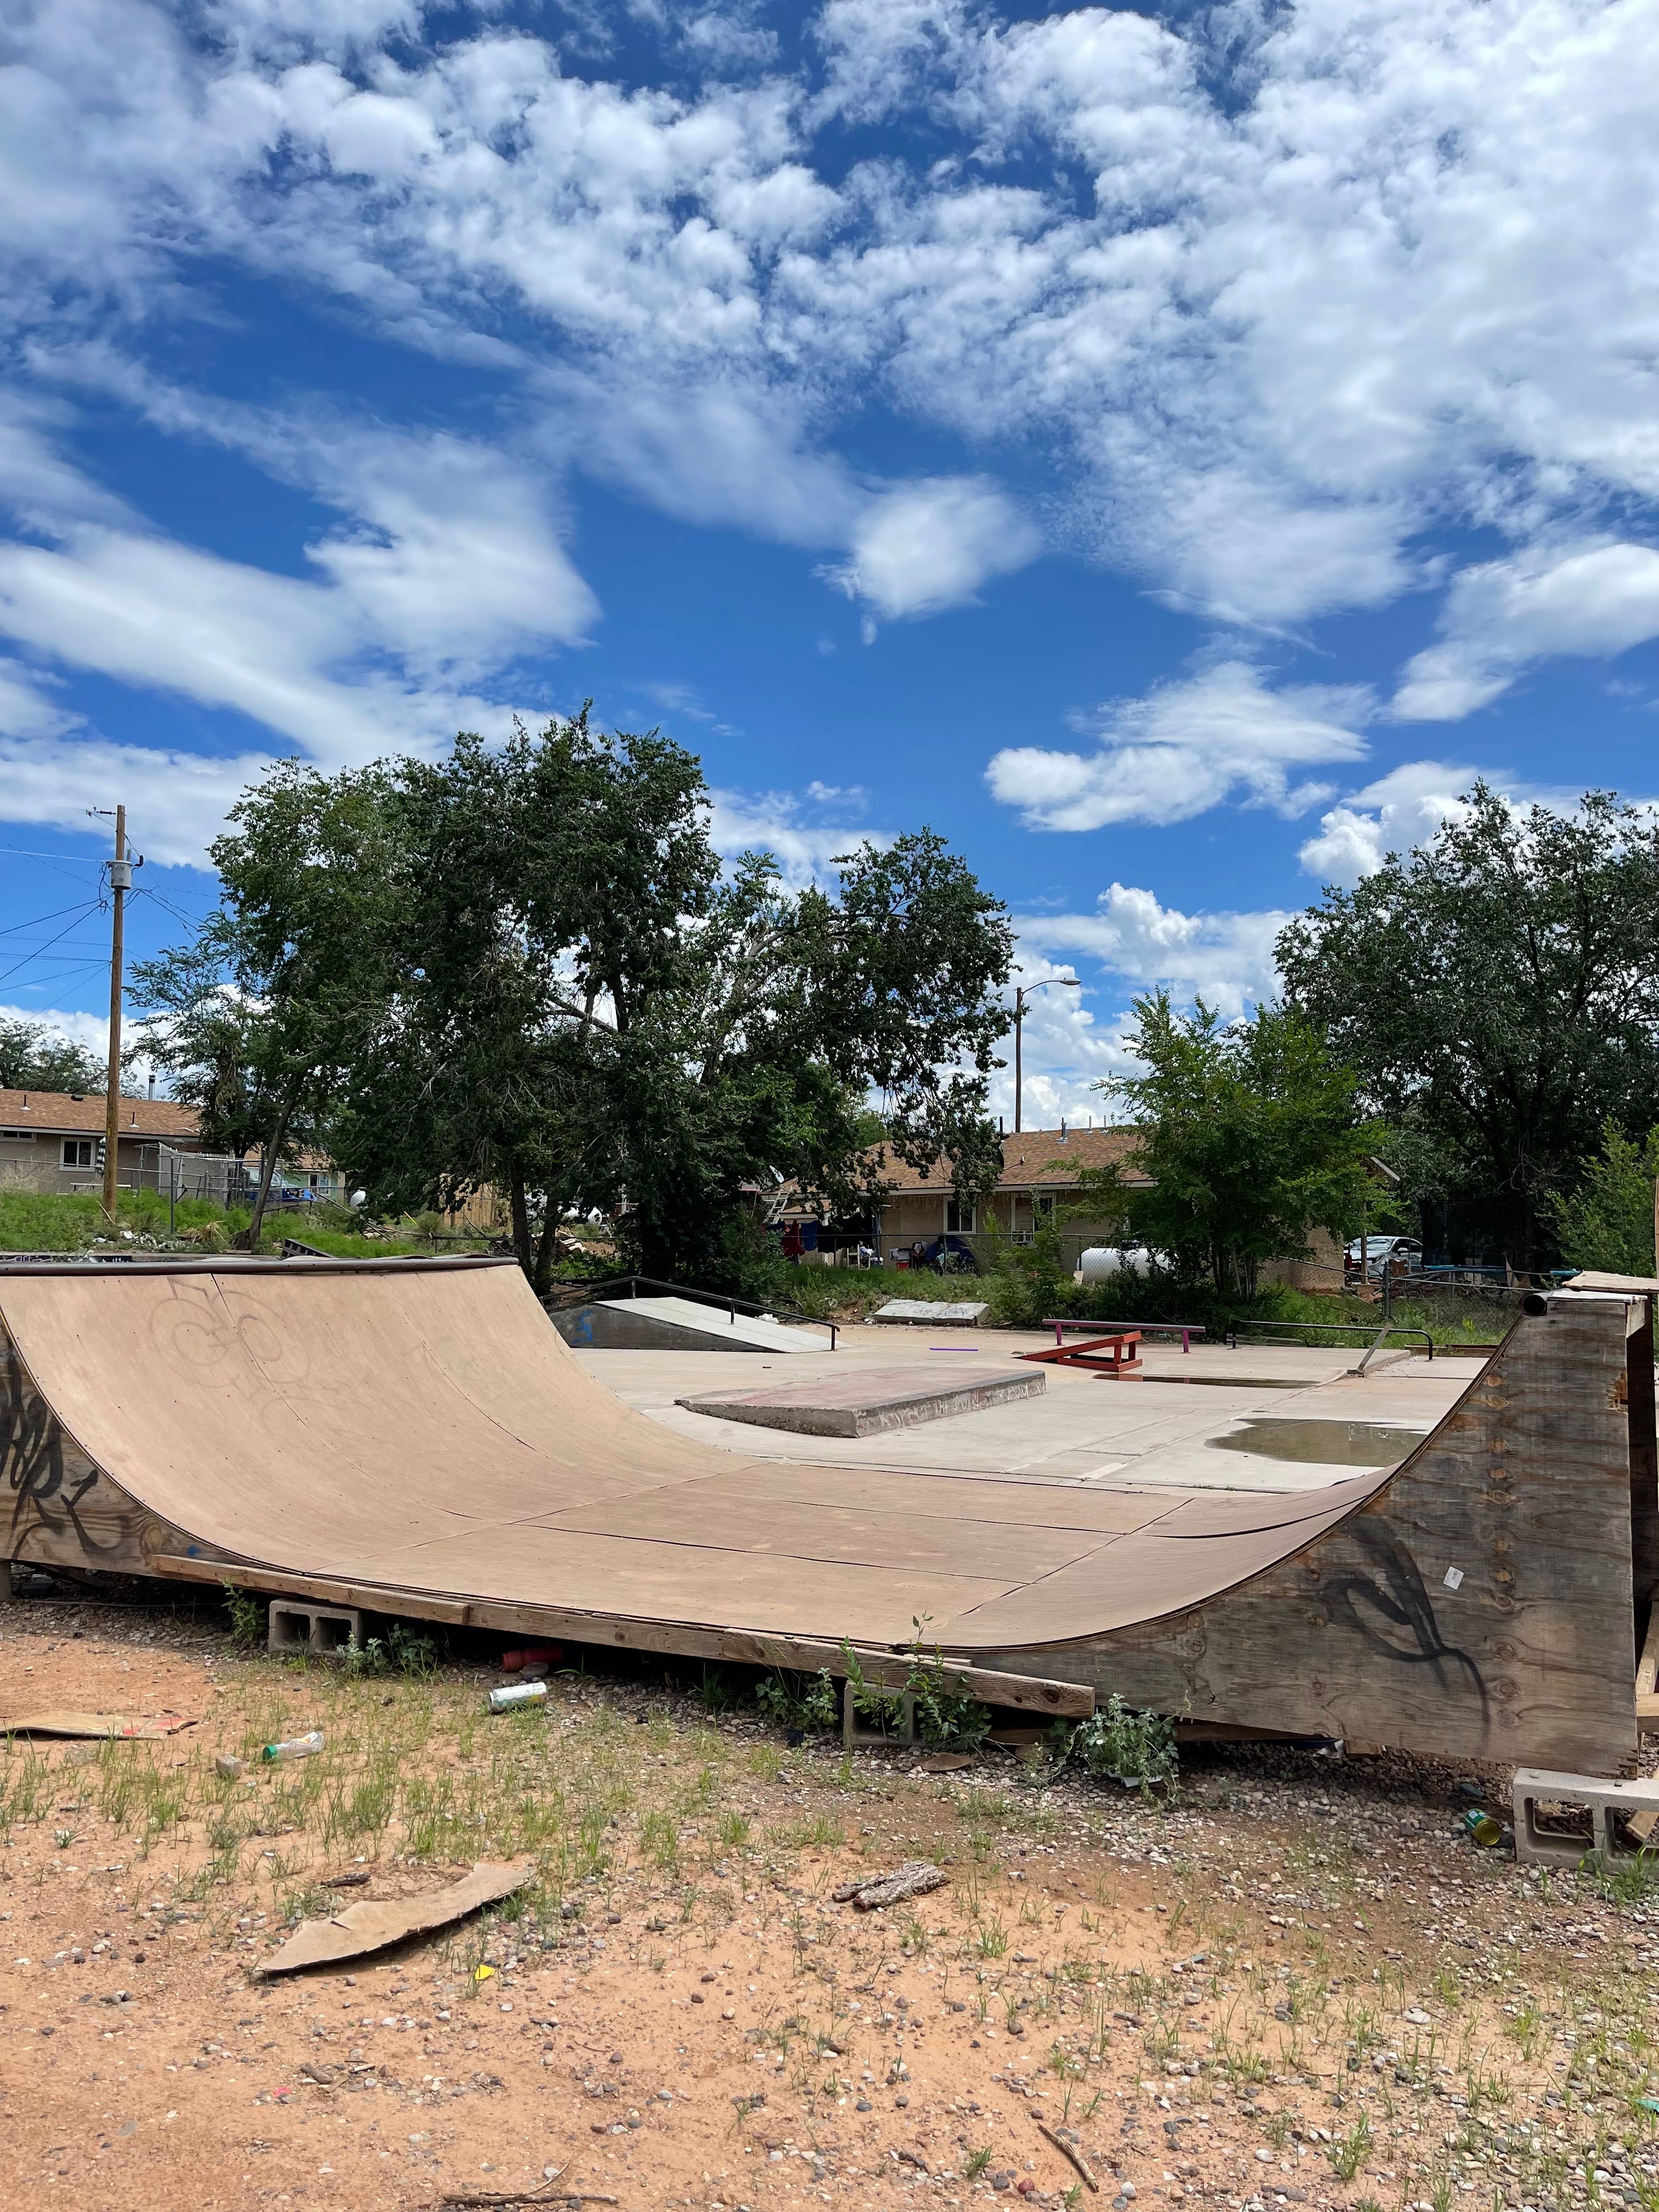 The current Whiteriver skatepark is called a DIY Park. These unofficial facilities exist on swaths of abandoned or unused concrete on streets, under bridges, or in abandoned or unused lots. They are built by the skaters themselves, over time with whatever materials are available at the moment.